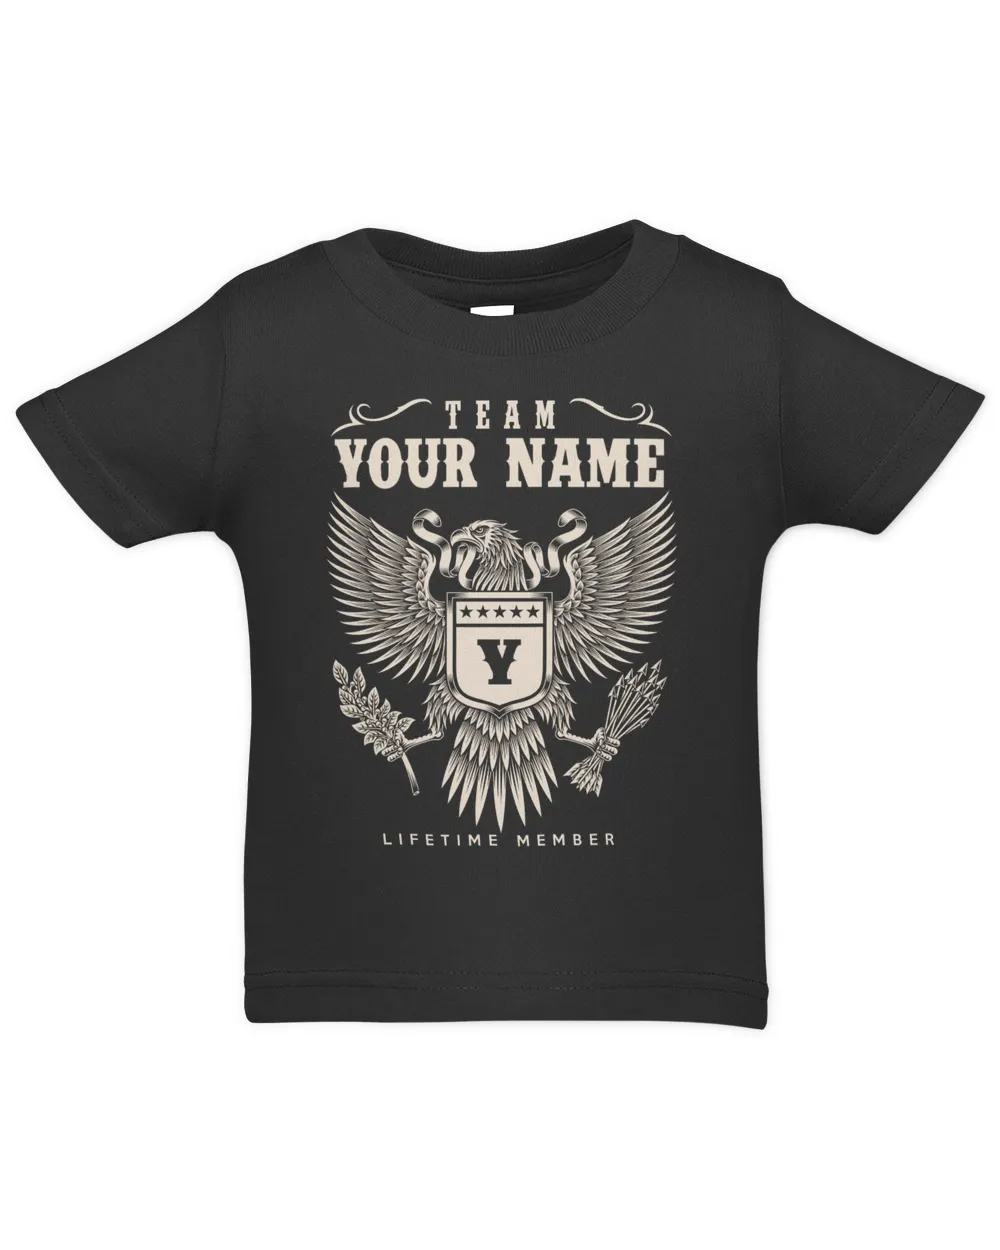 Team Your Name ! Lifetime member ! personalize your t-shirt